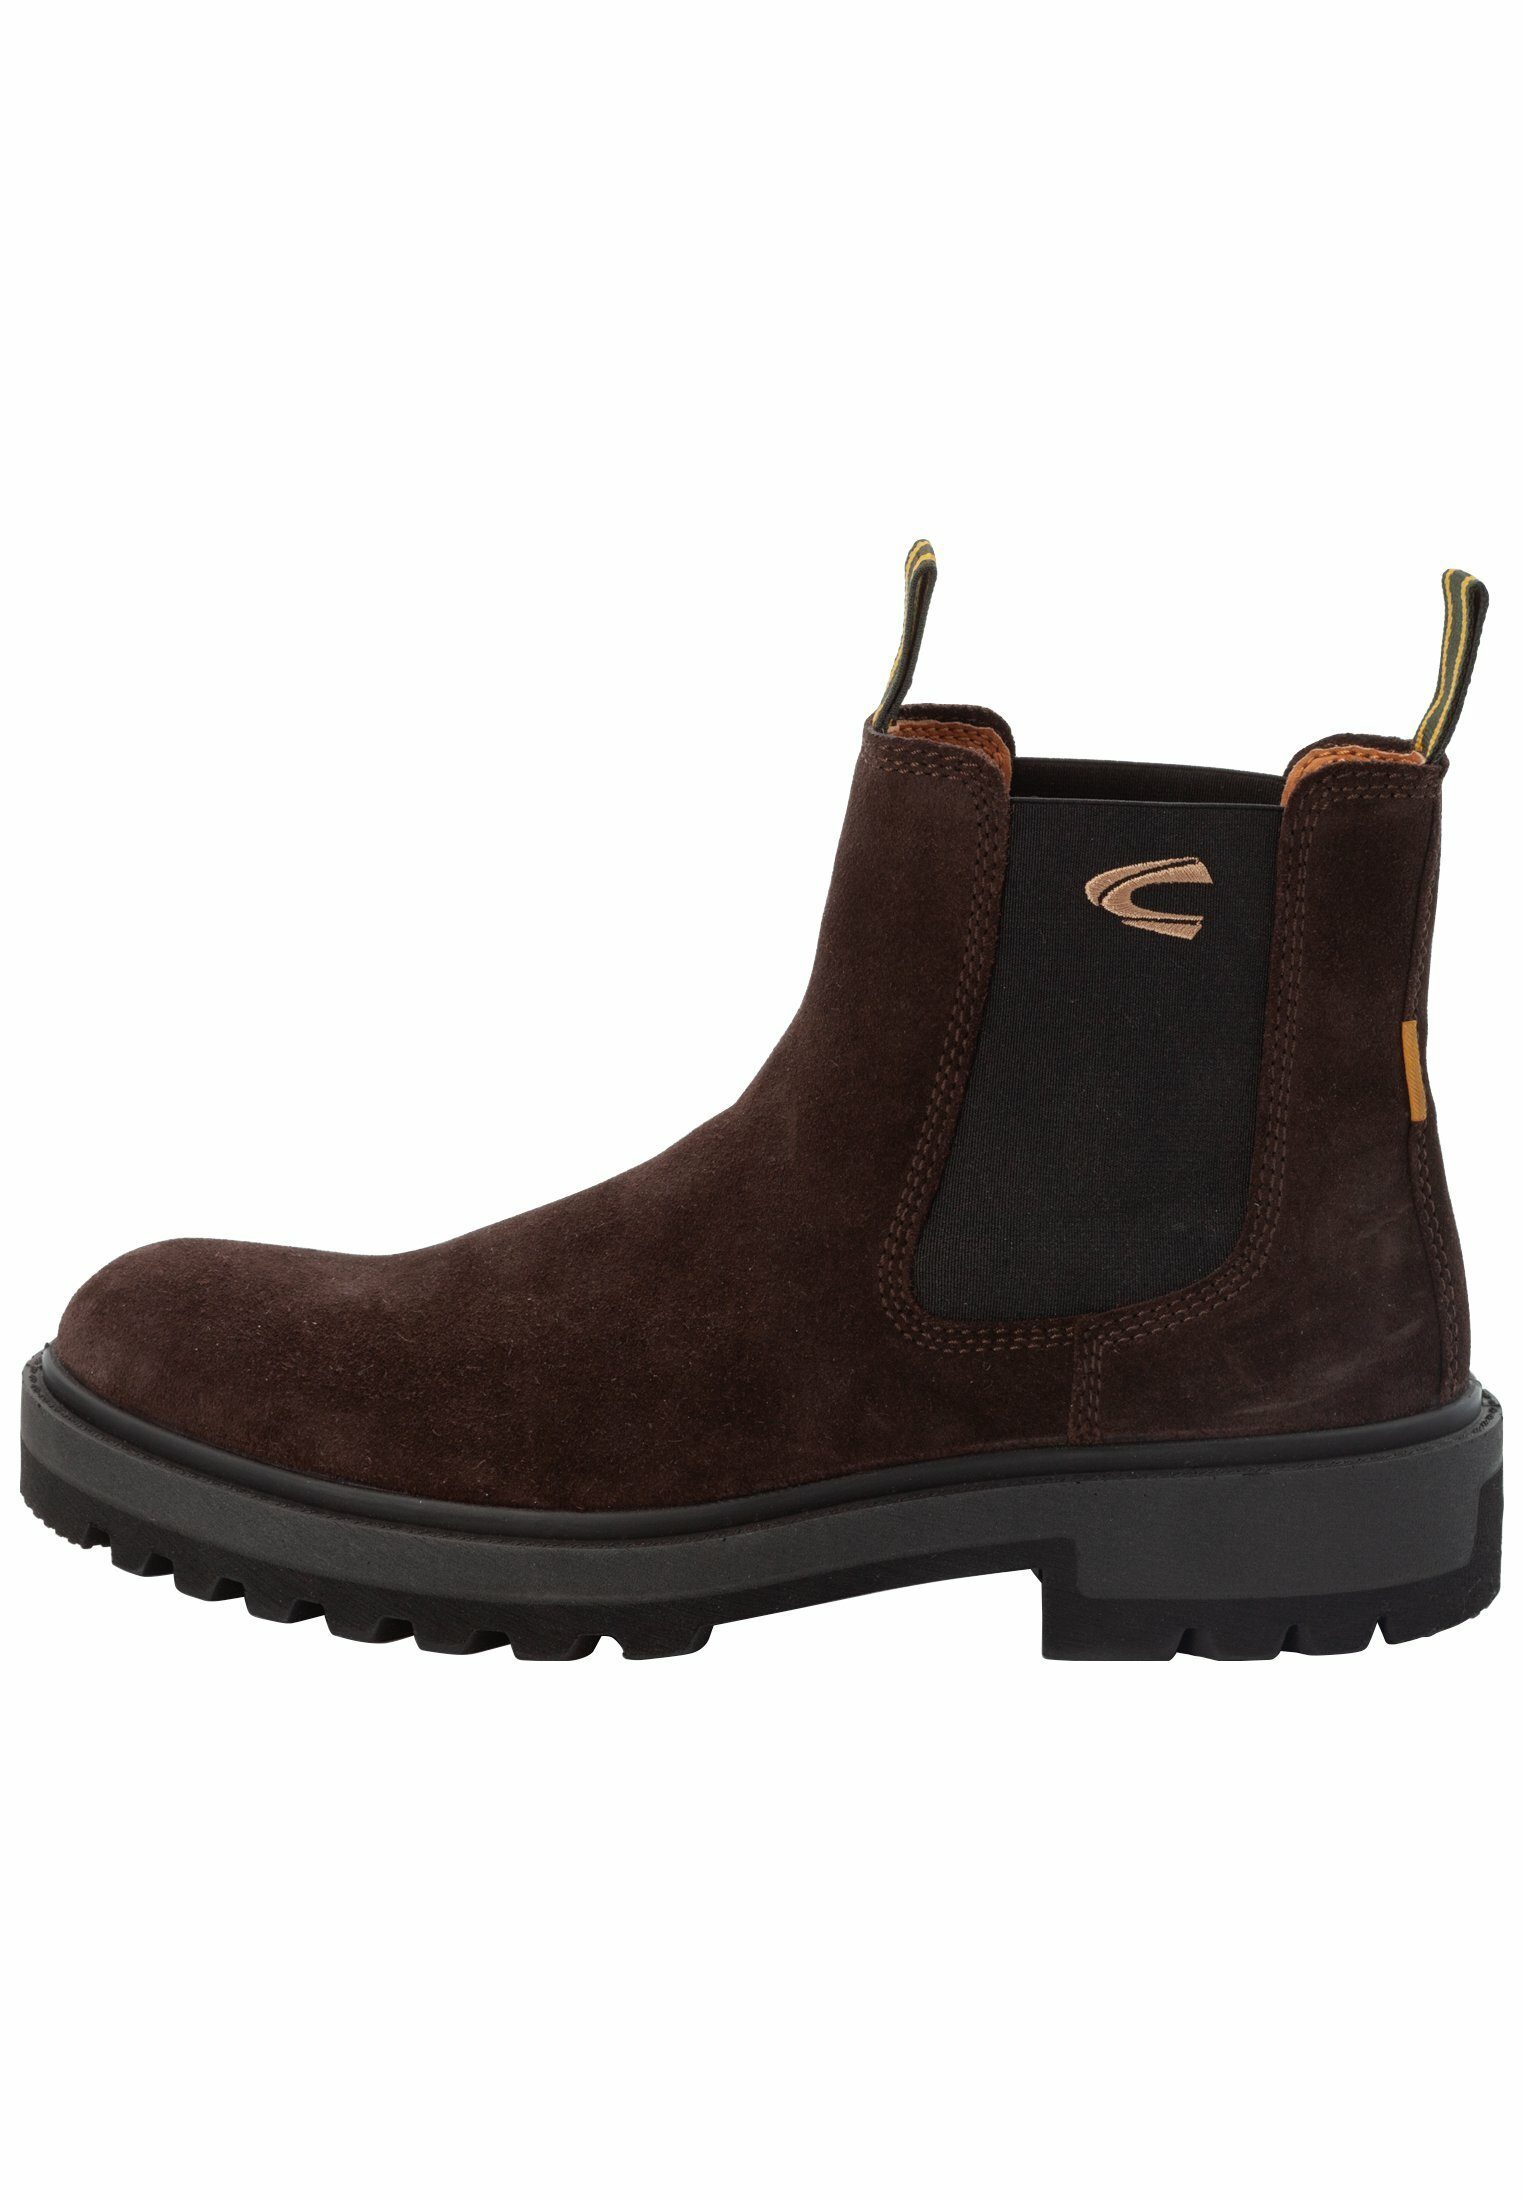 active Stiefelette, besonders ist Forest leicht camel TPU-Sohle